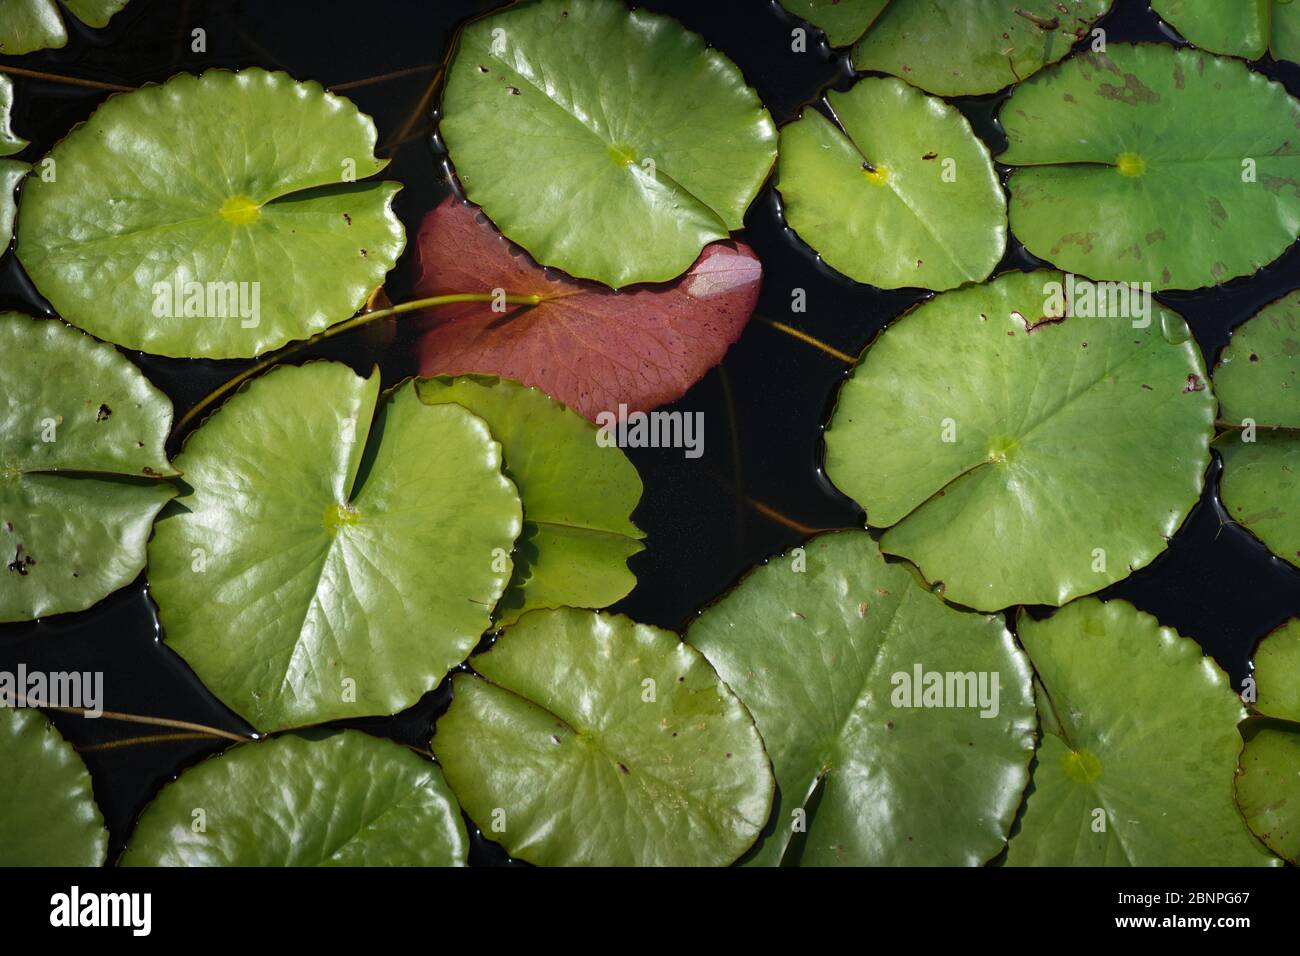 Looking down on shiny green lily pads floating on dark water,one pad has been overturned and is pink,adding visual interest, variety. Background shot? Stock Photo